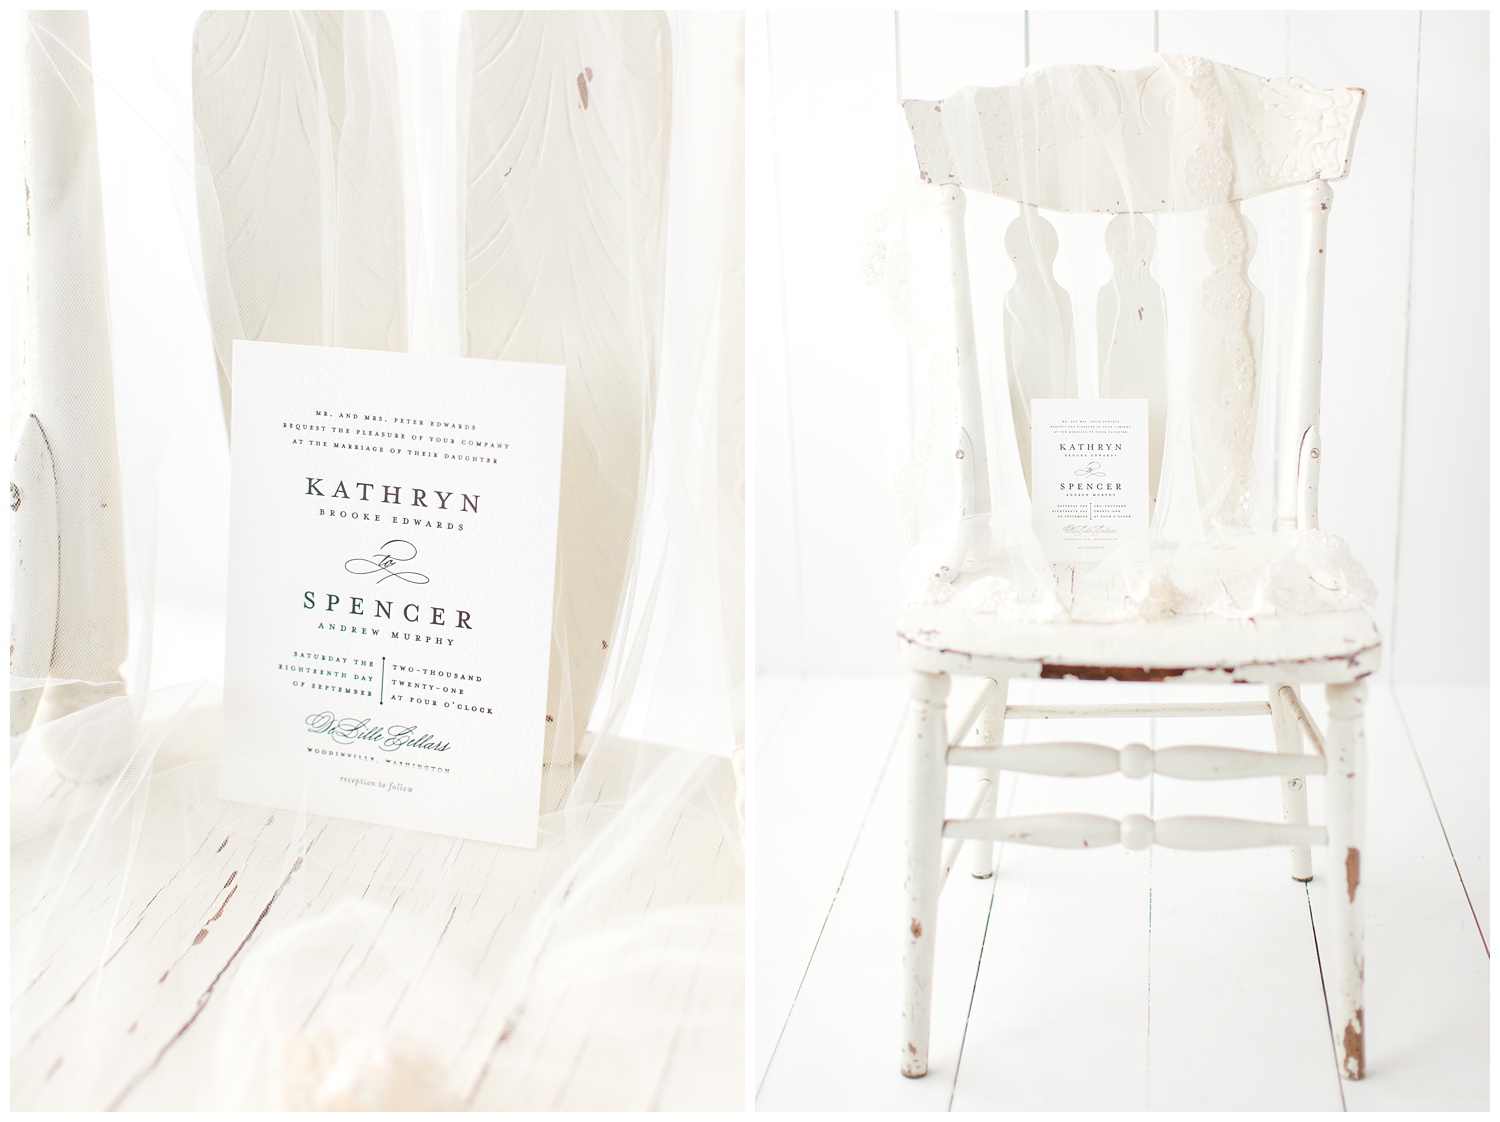 Simple white letter-pressed wedding invitation on linen paper from Minted beautifully styled with an antique white chair and wedding veil.